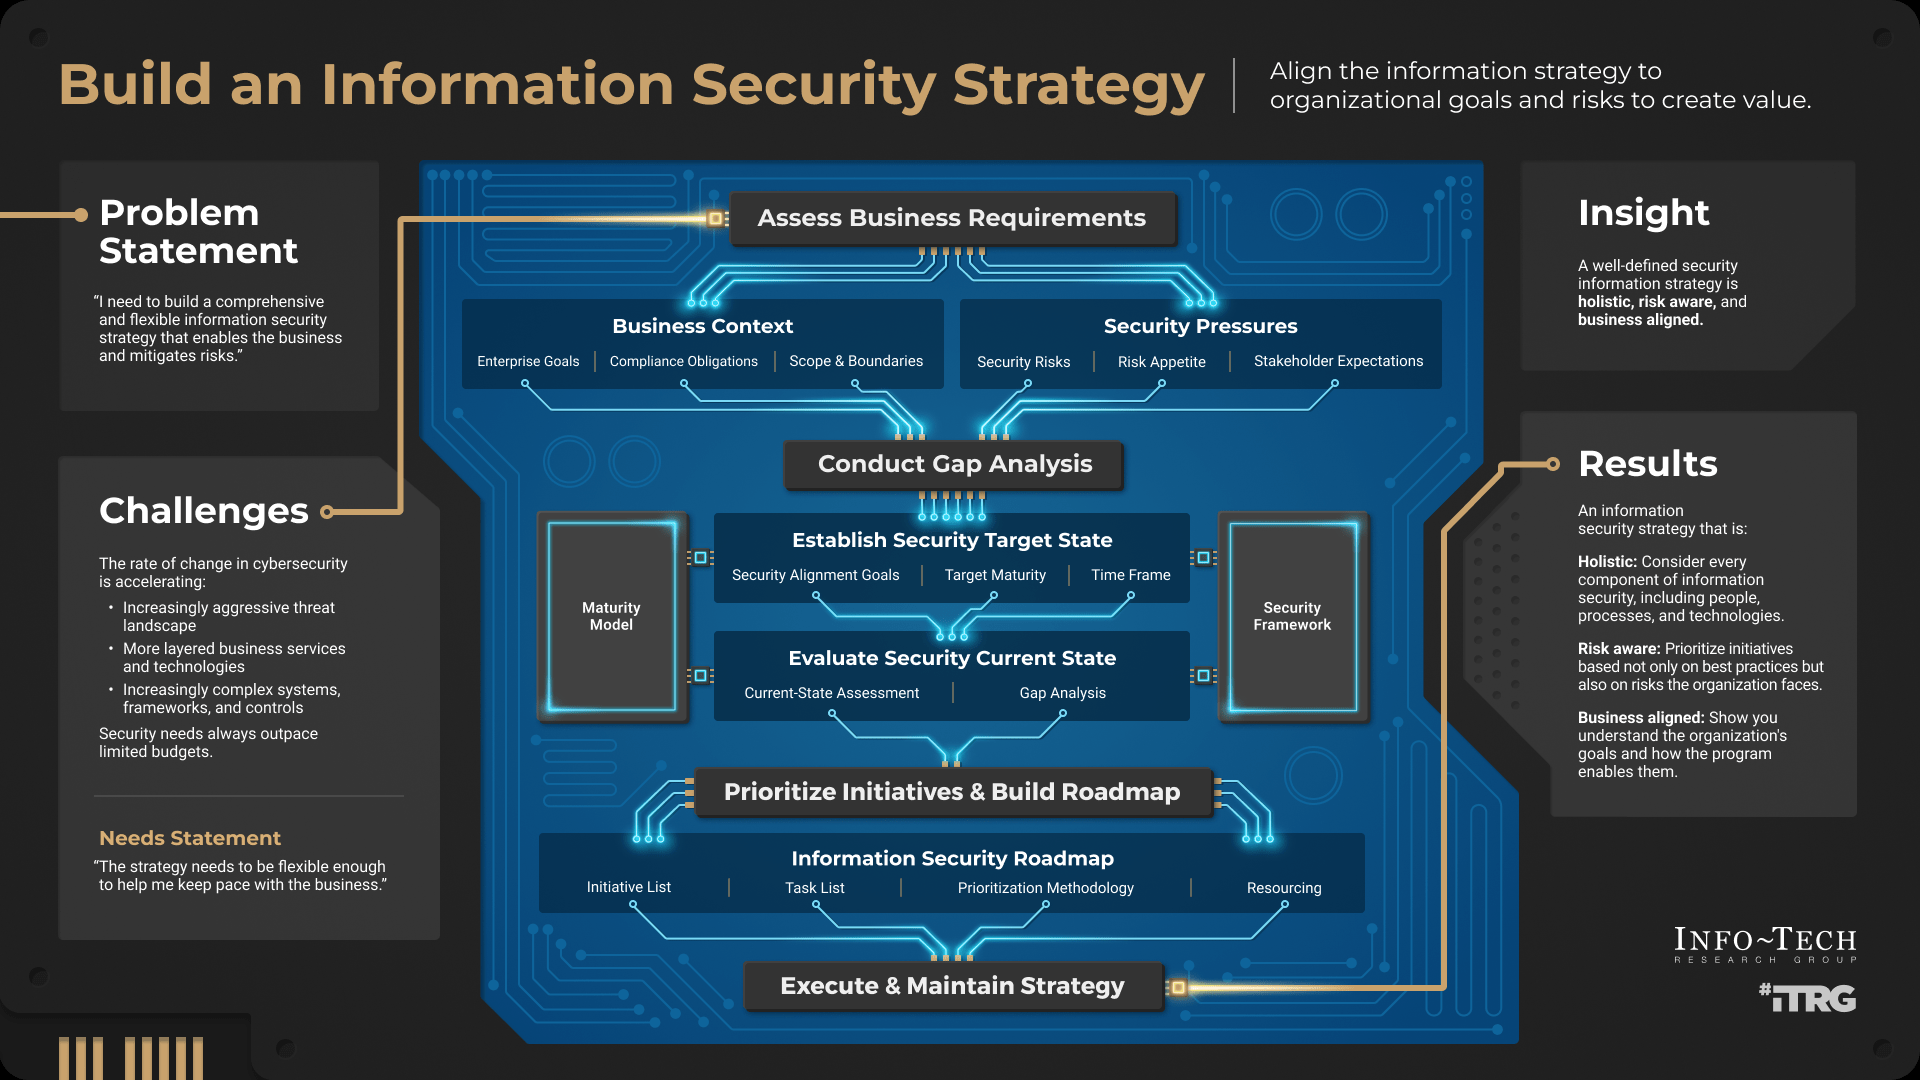 The image contains a screenshot of the Thought Model Build and Information Security Strategy.